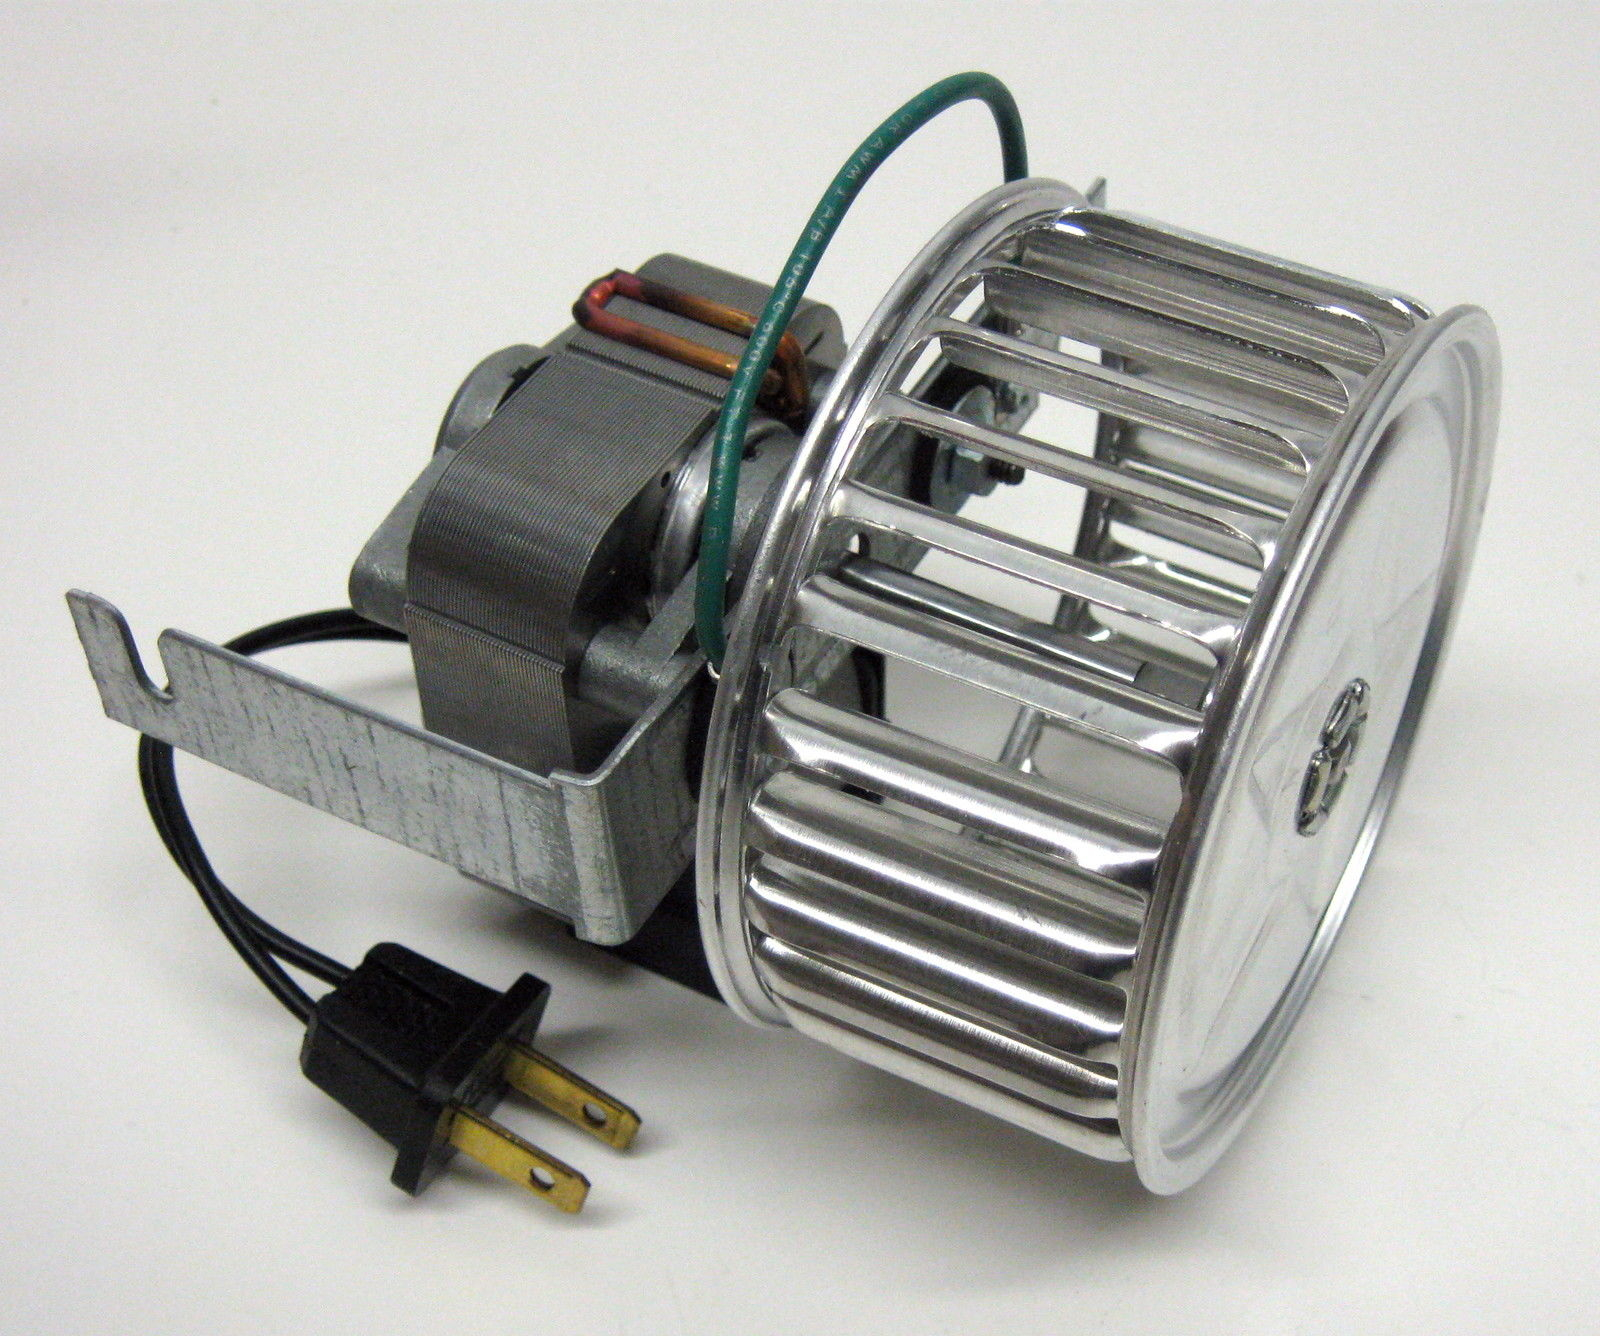 Broan Bathroom Fan Replacement Motor Image Of Bathroom And with size 1600 X 1336